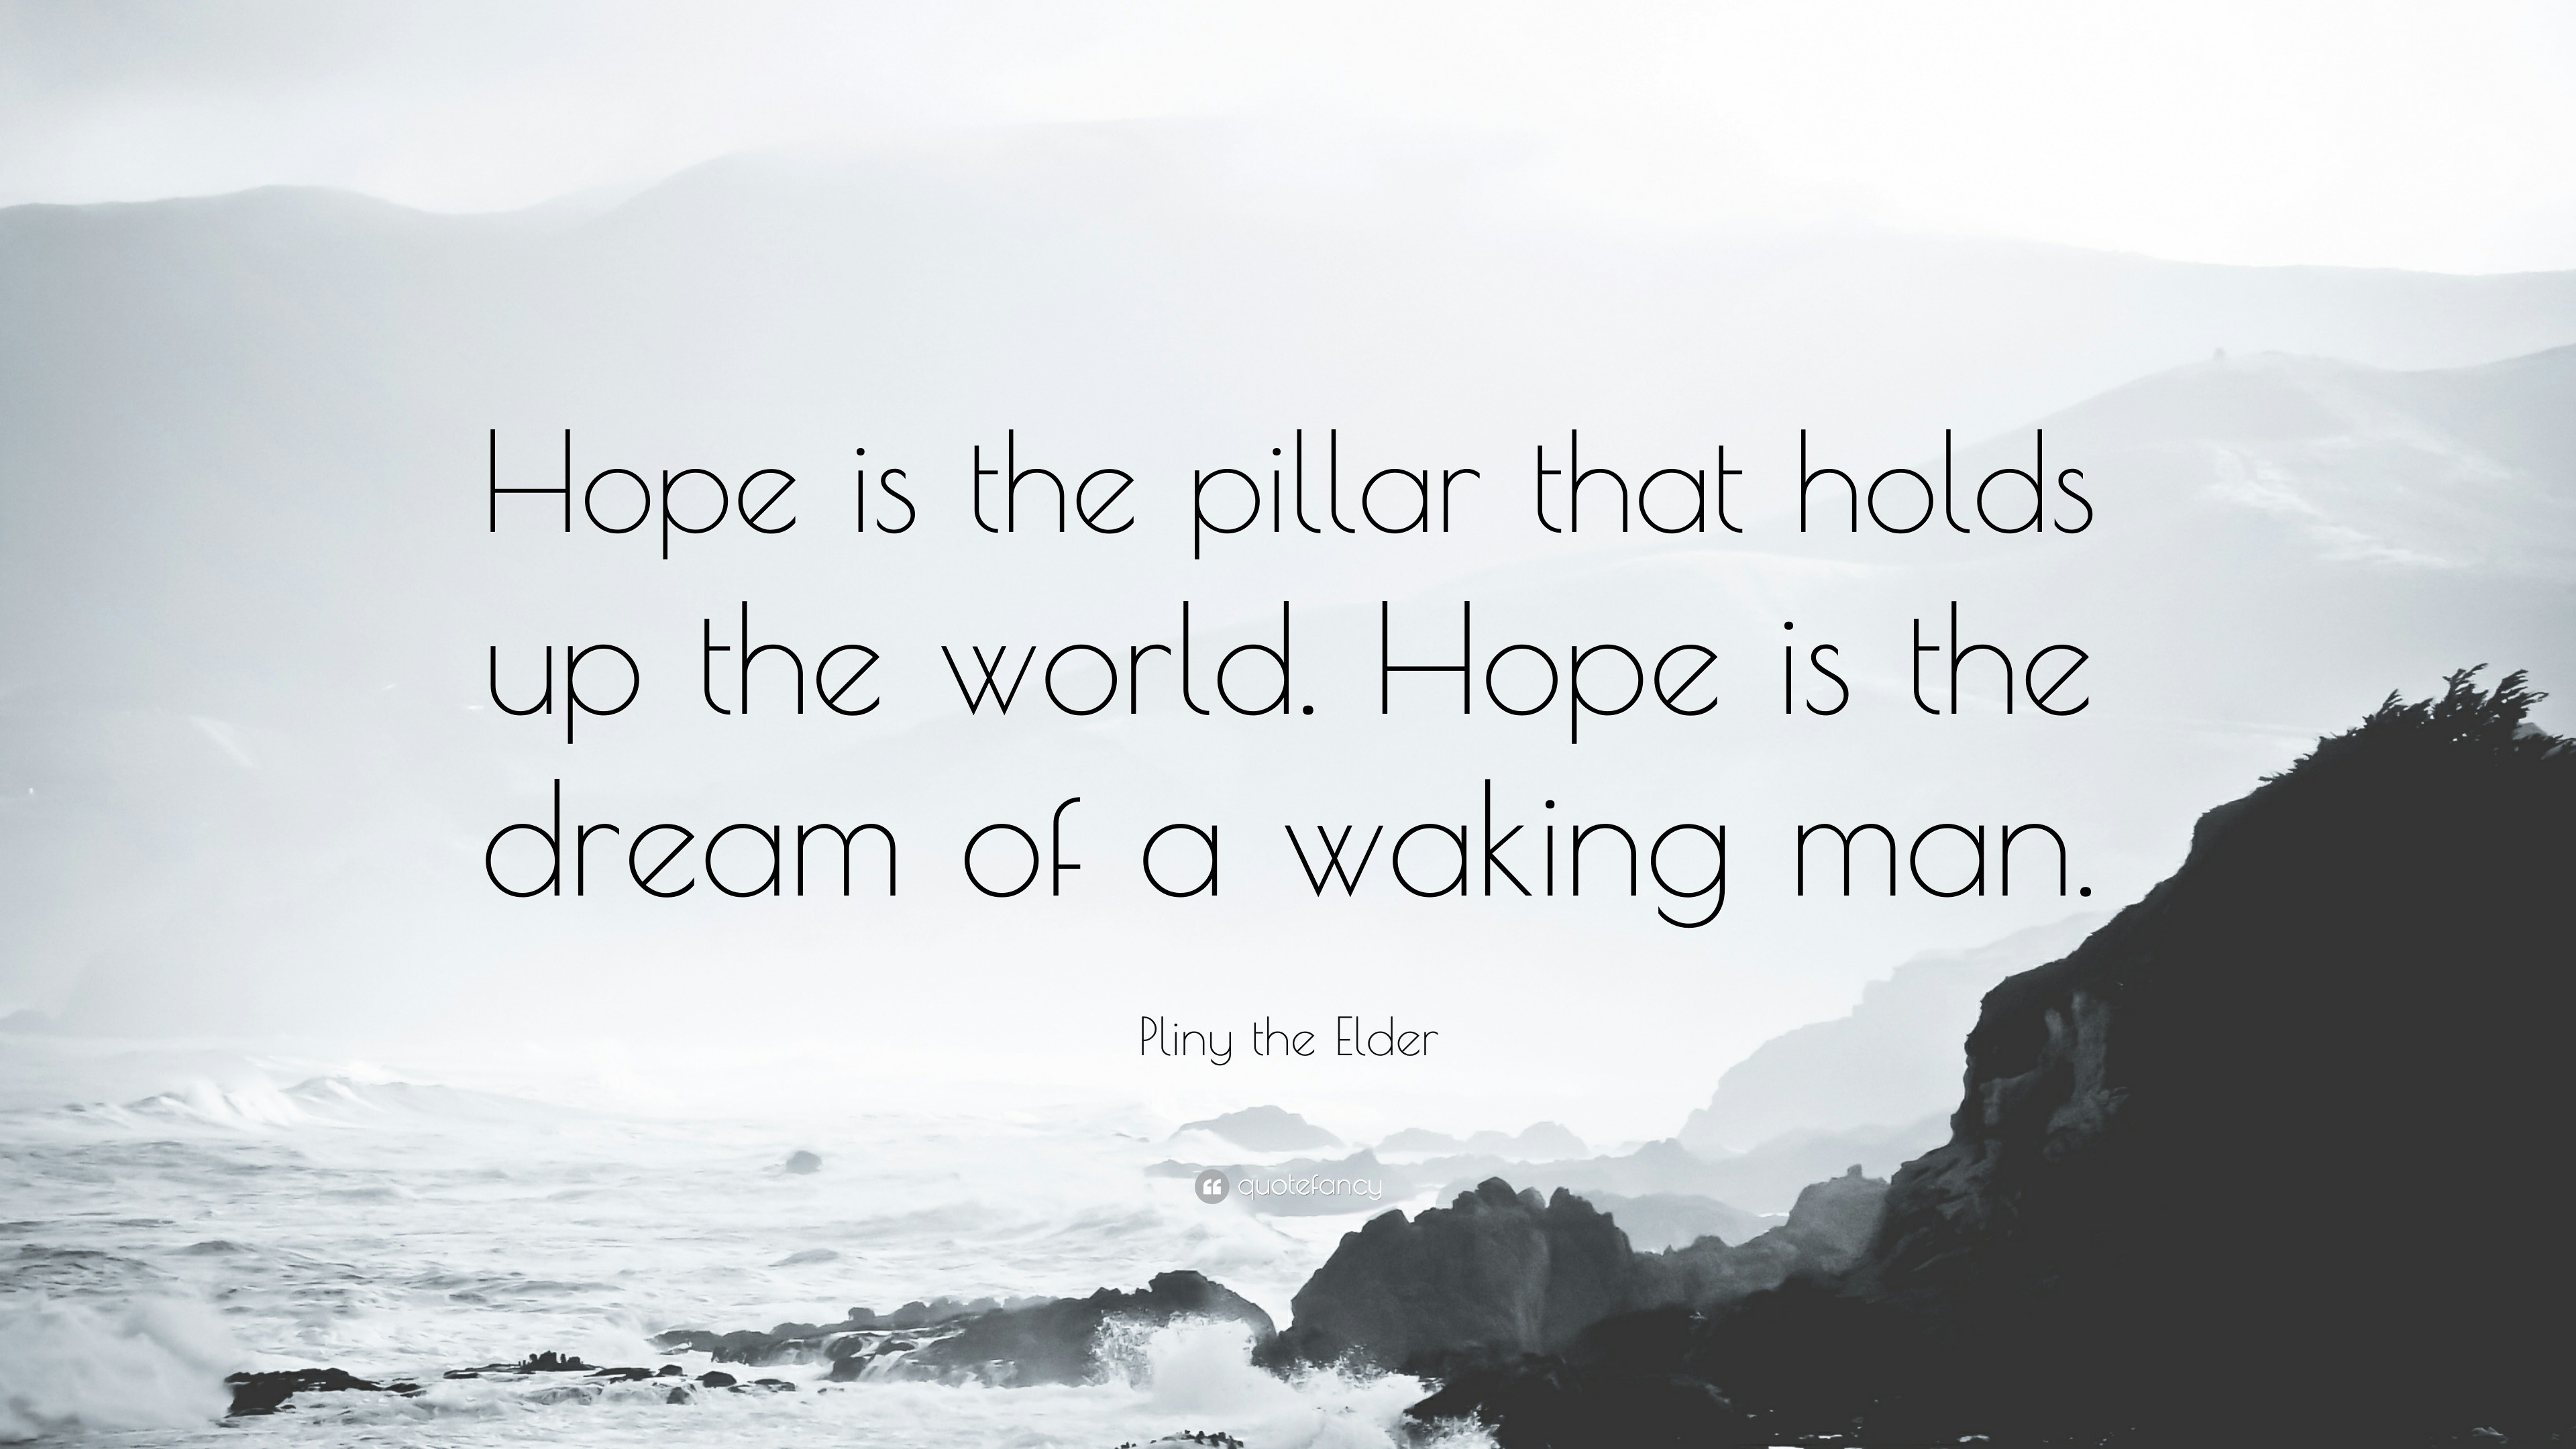 Pliny the Elder Quote: “Hope is the pillar that holds up the world. Hope is  the